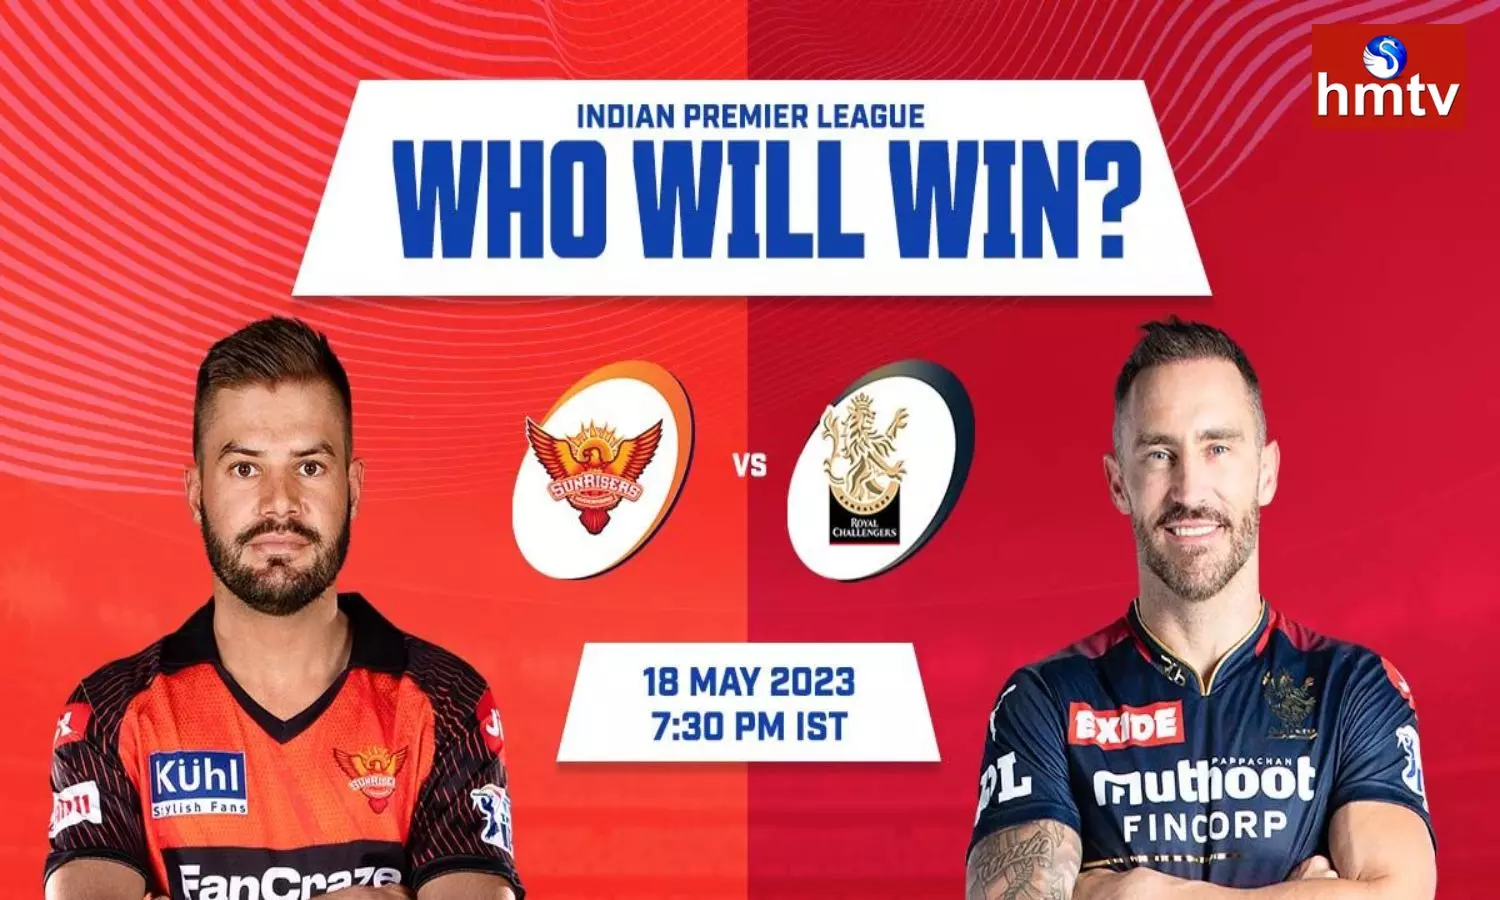 Clash Between Royal Challengers Bangalore And Sunrisers Hyderabad